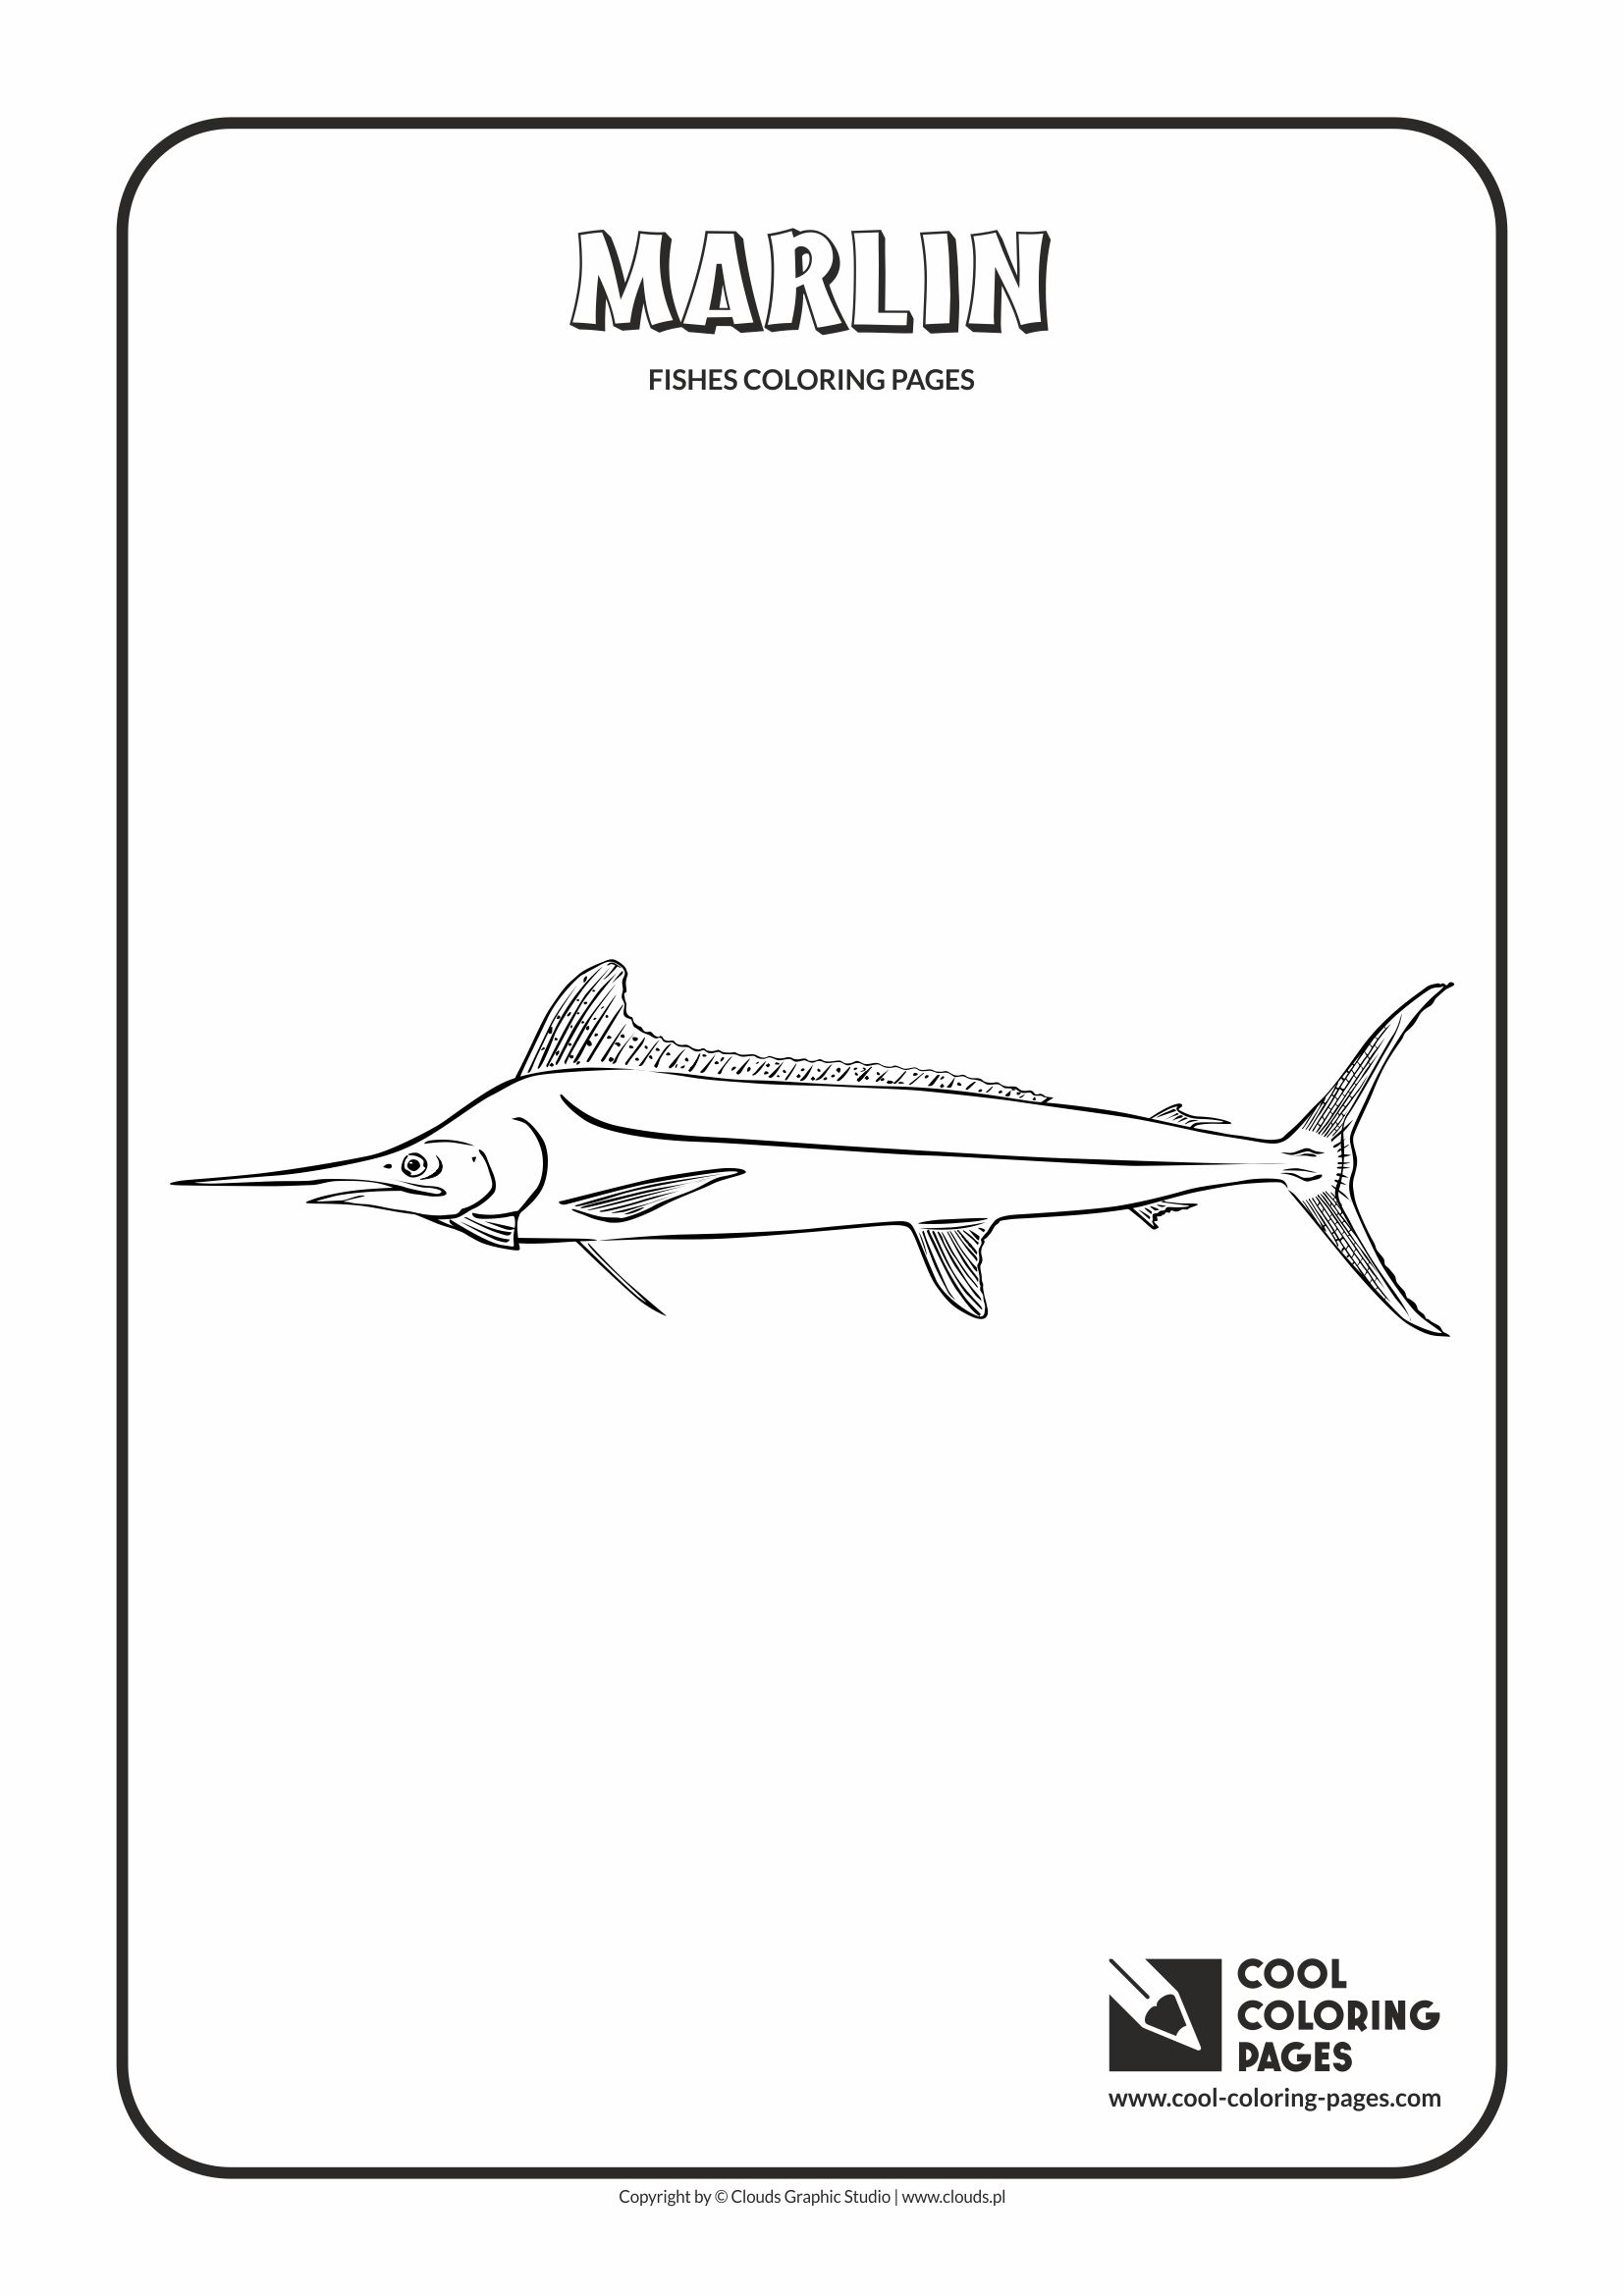 Cool Coloring Pages Fishes coloring pages - Cool Coloring Pages | Free